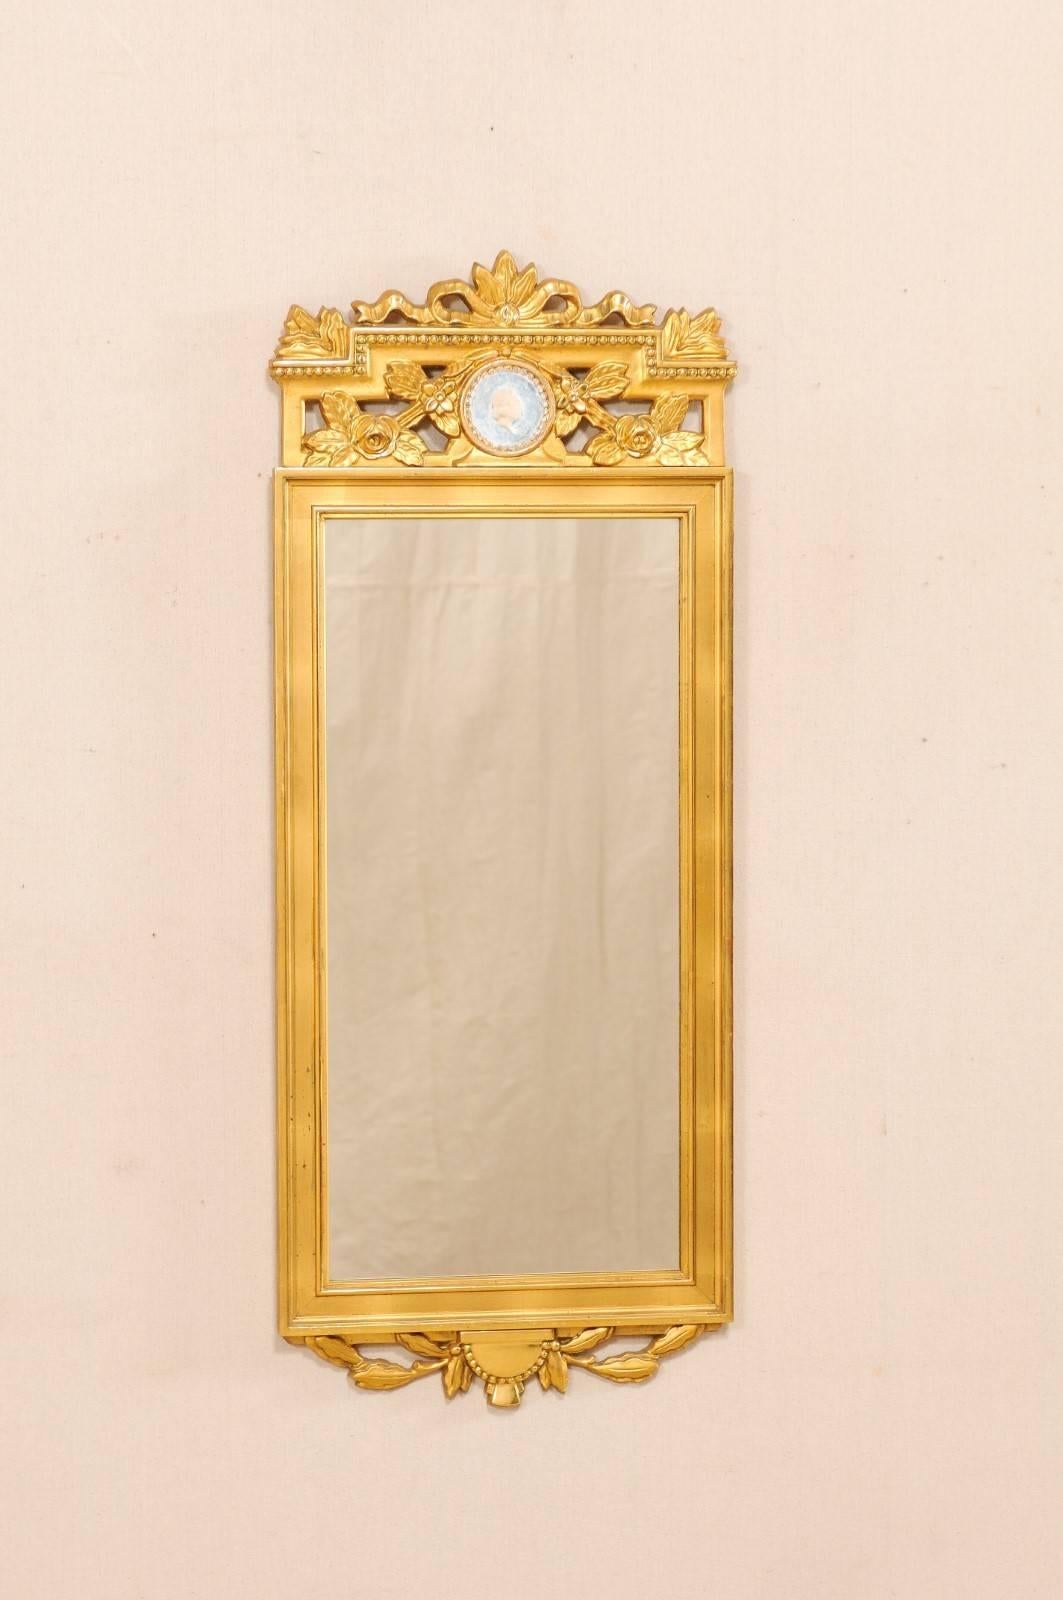 A Swedish neoclassical style gilt mirror from the early 20th century. This antique Swedish Neoclassical style gilded trumeau mirror features an ornately decorated pierce carved top in a bow and floral motif with beaded accents and a profiled cameo